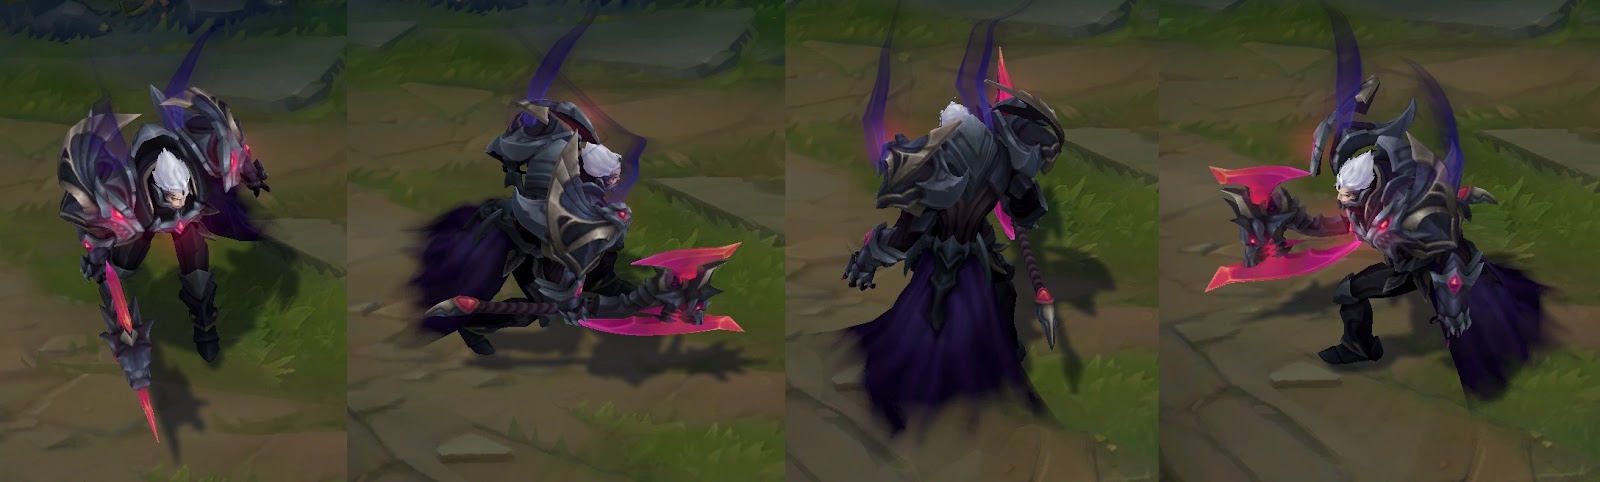 god king darius skin for league of legends ingame picture